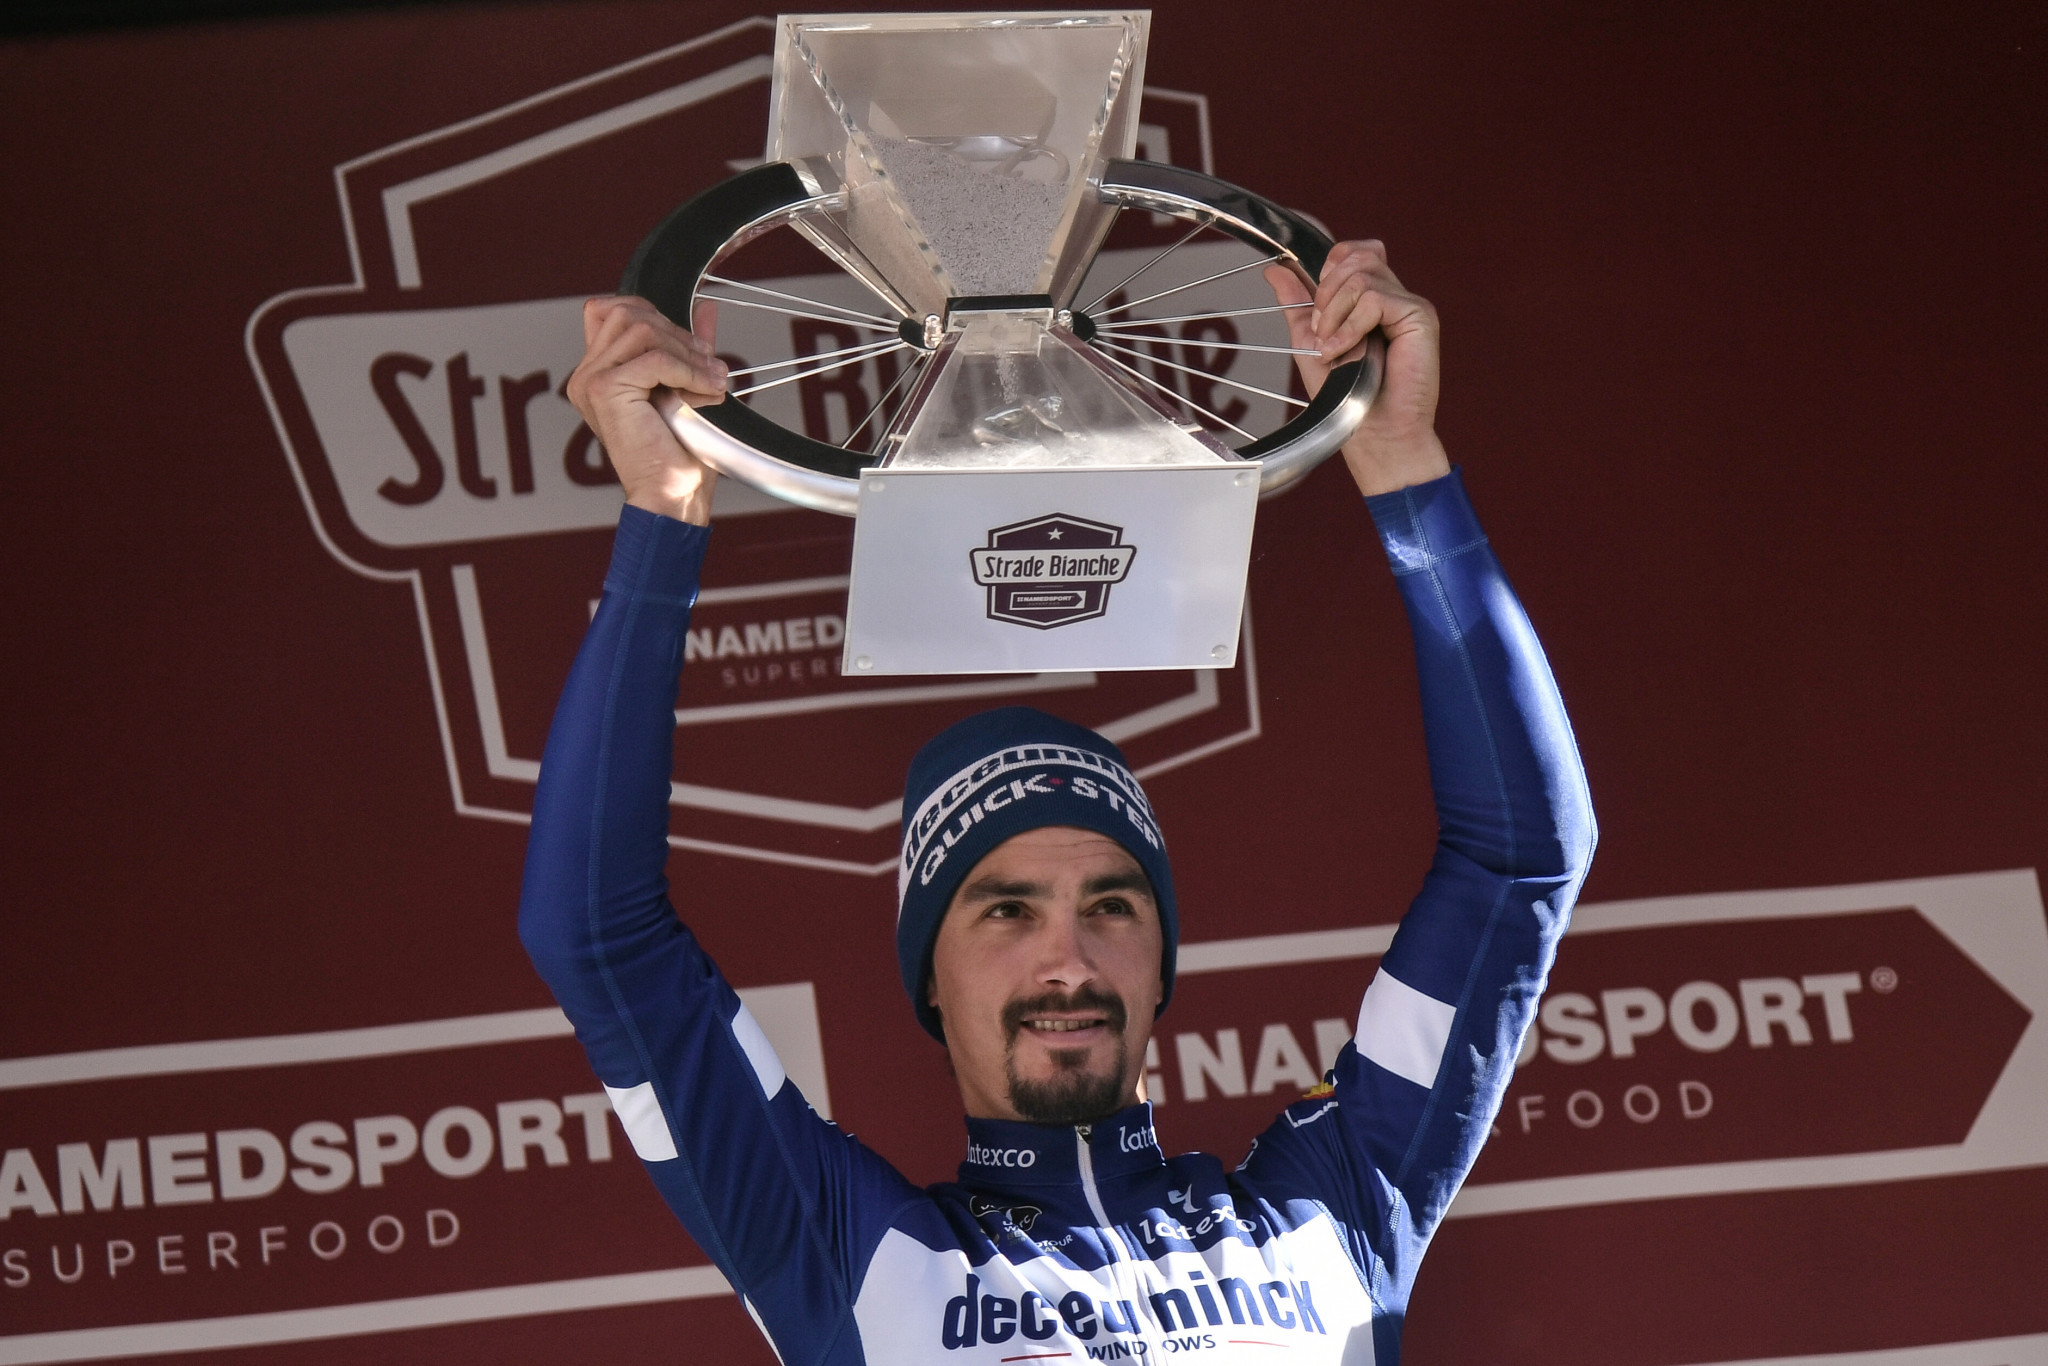 Alaphilippe becomes first French rider to win Strade Bianche